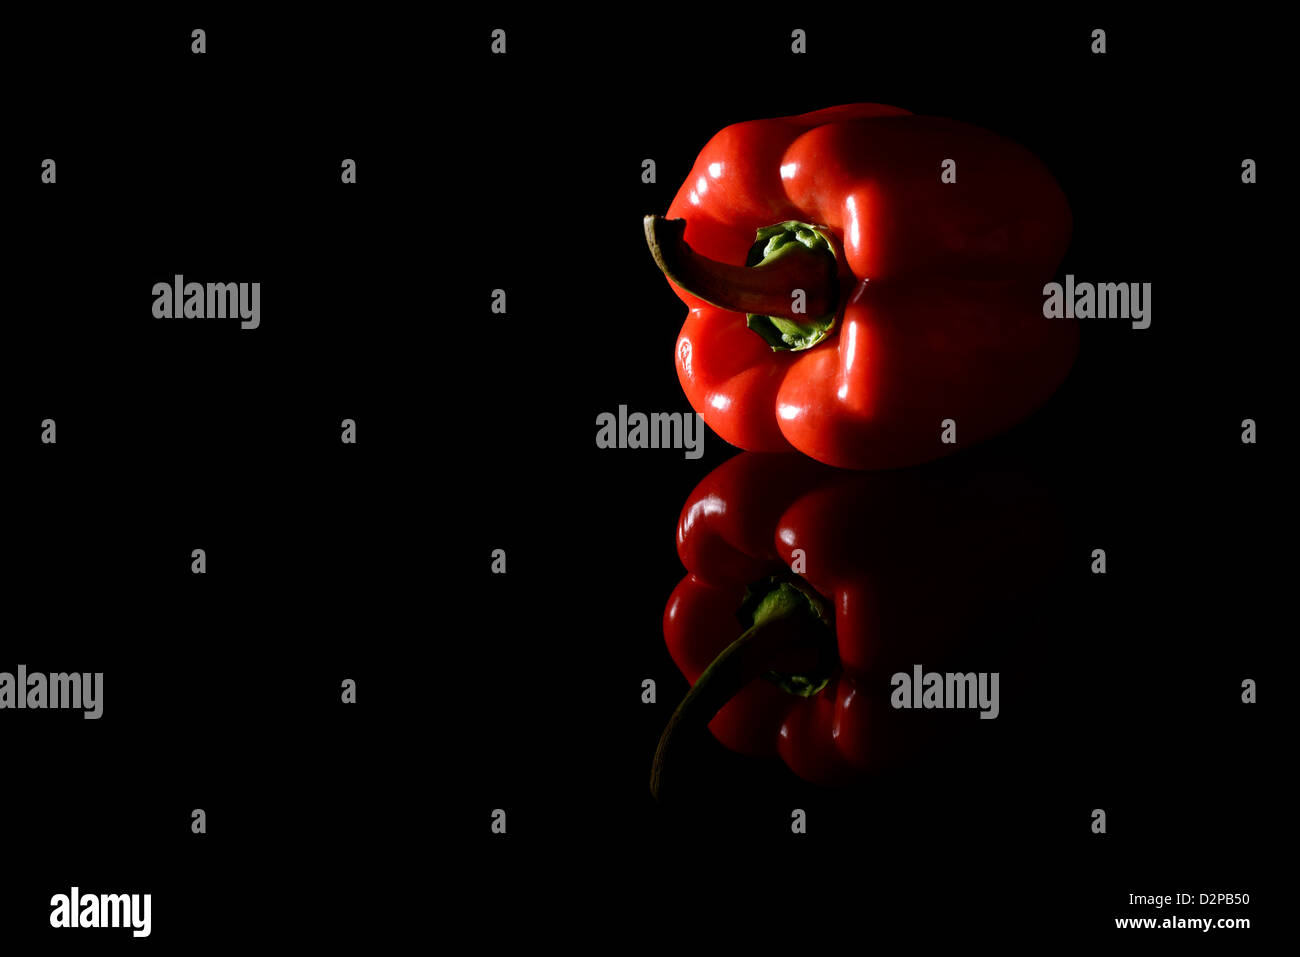 Red pepper or Capsicum on a black background. Studio shot Stock Photo